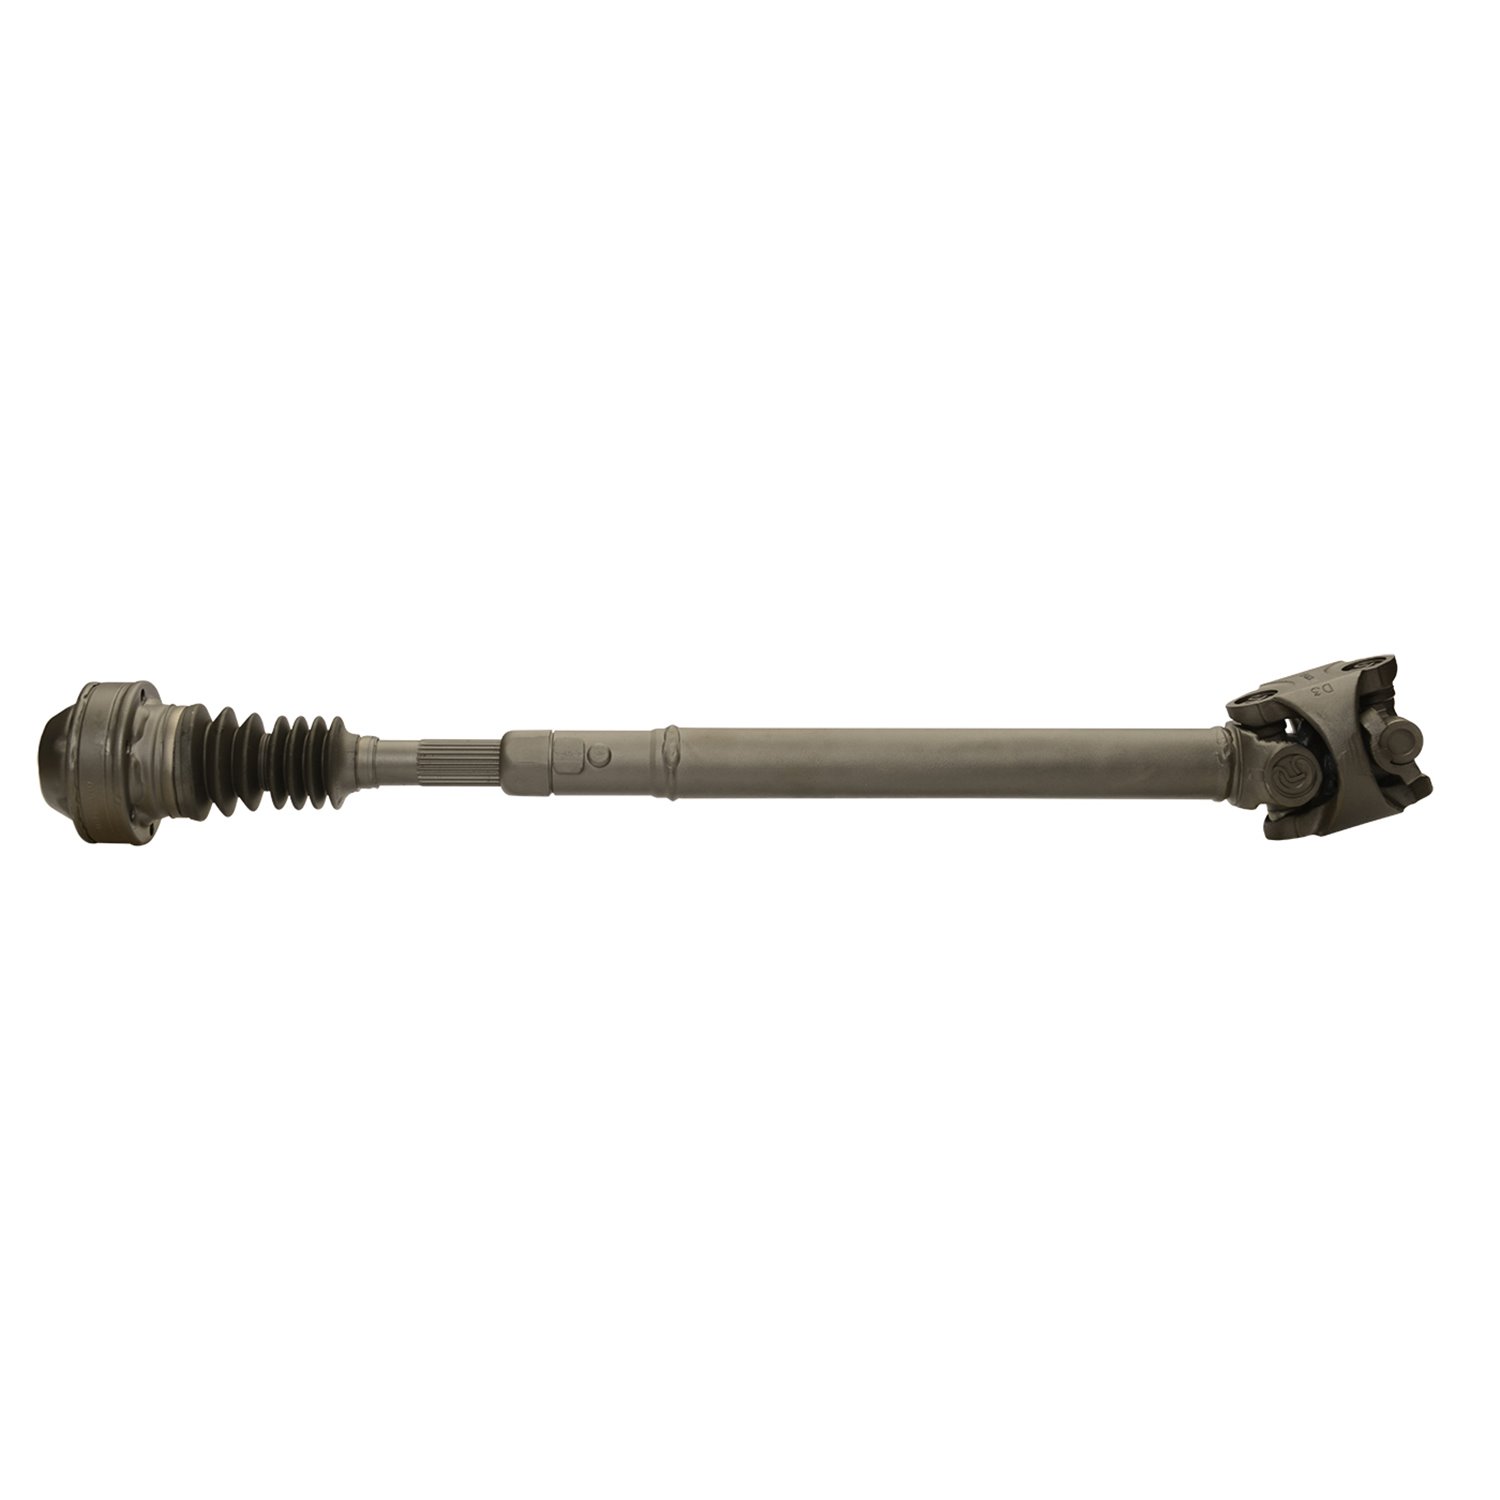 USA Standard ZDS9762 Front Driveshaft, For Grand Cherokee, 31-1/4 in. Flange To Center